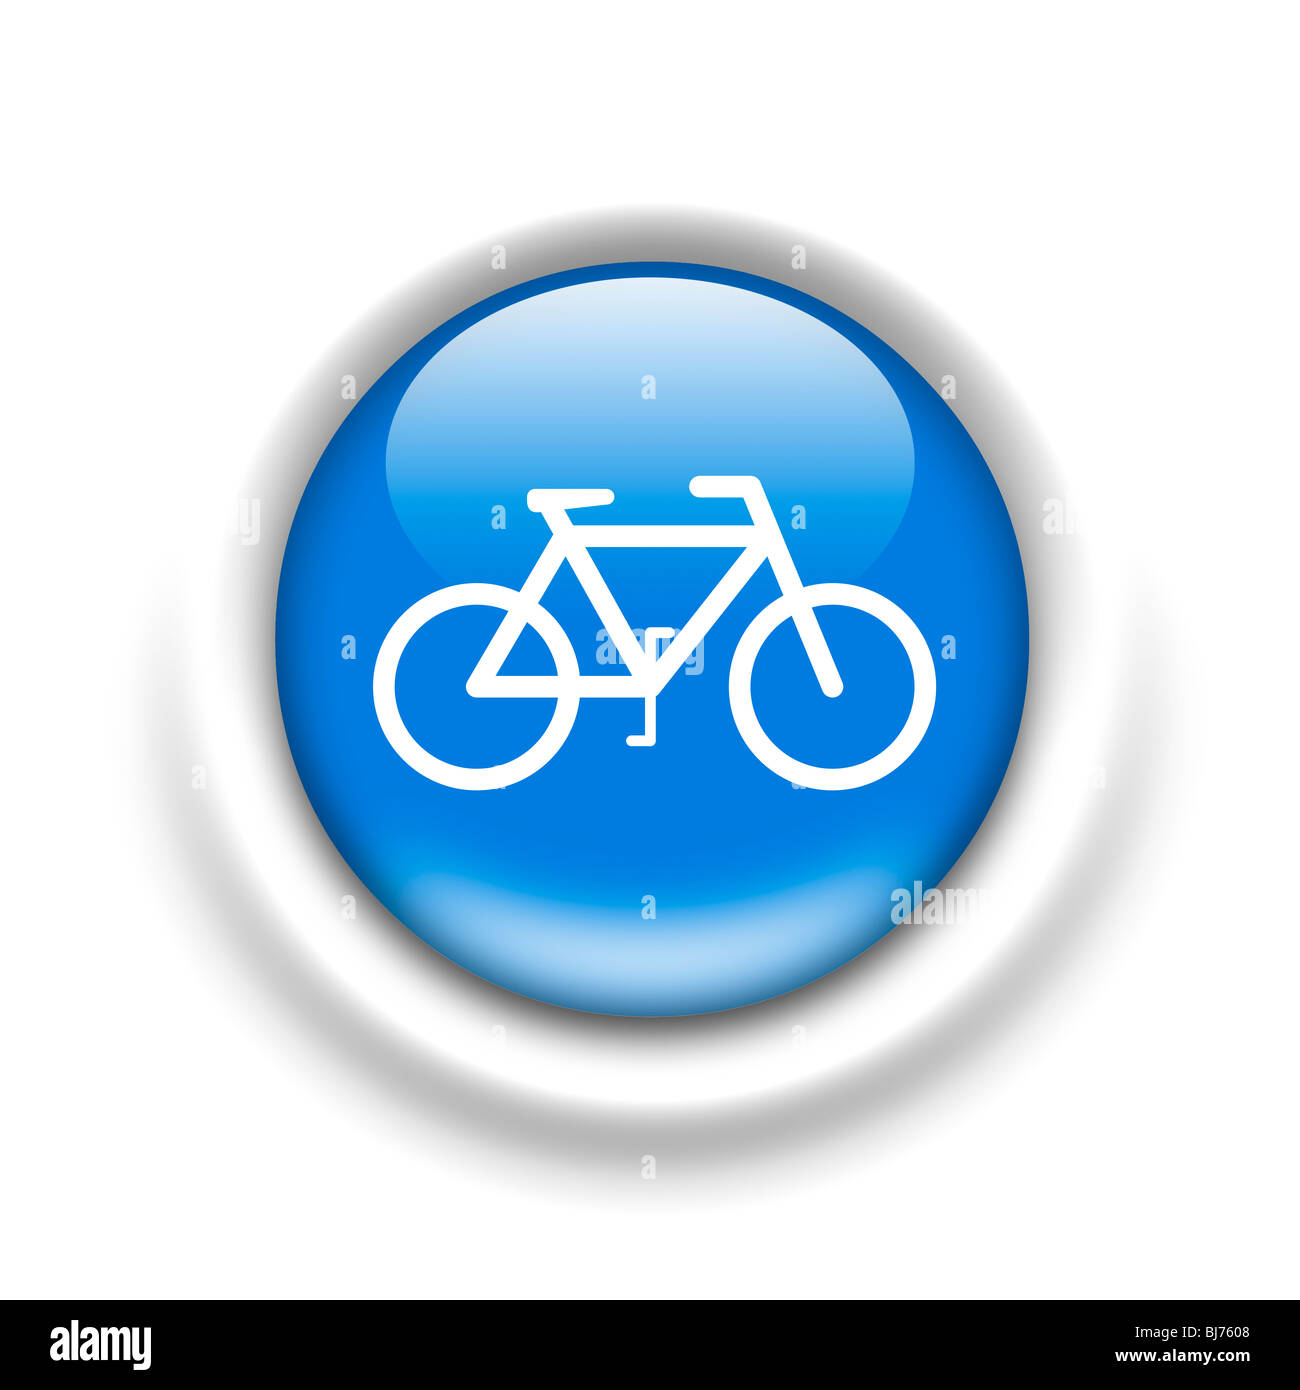 Recommended route for pedal cycles symbol Stock Photo